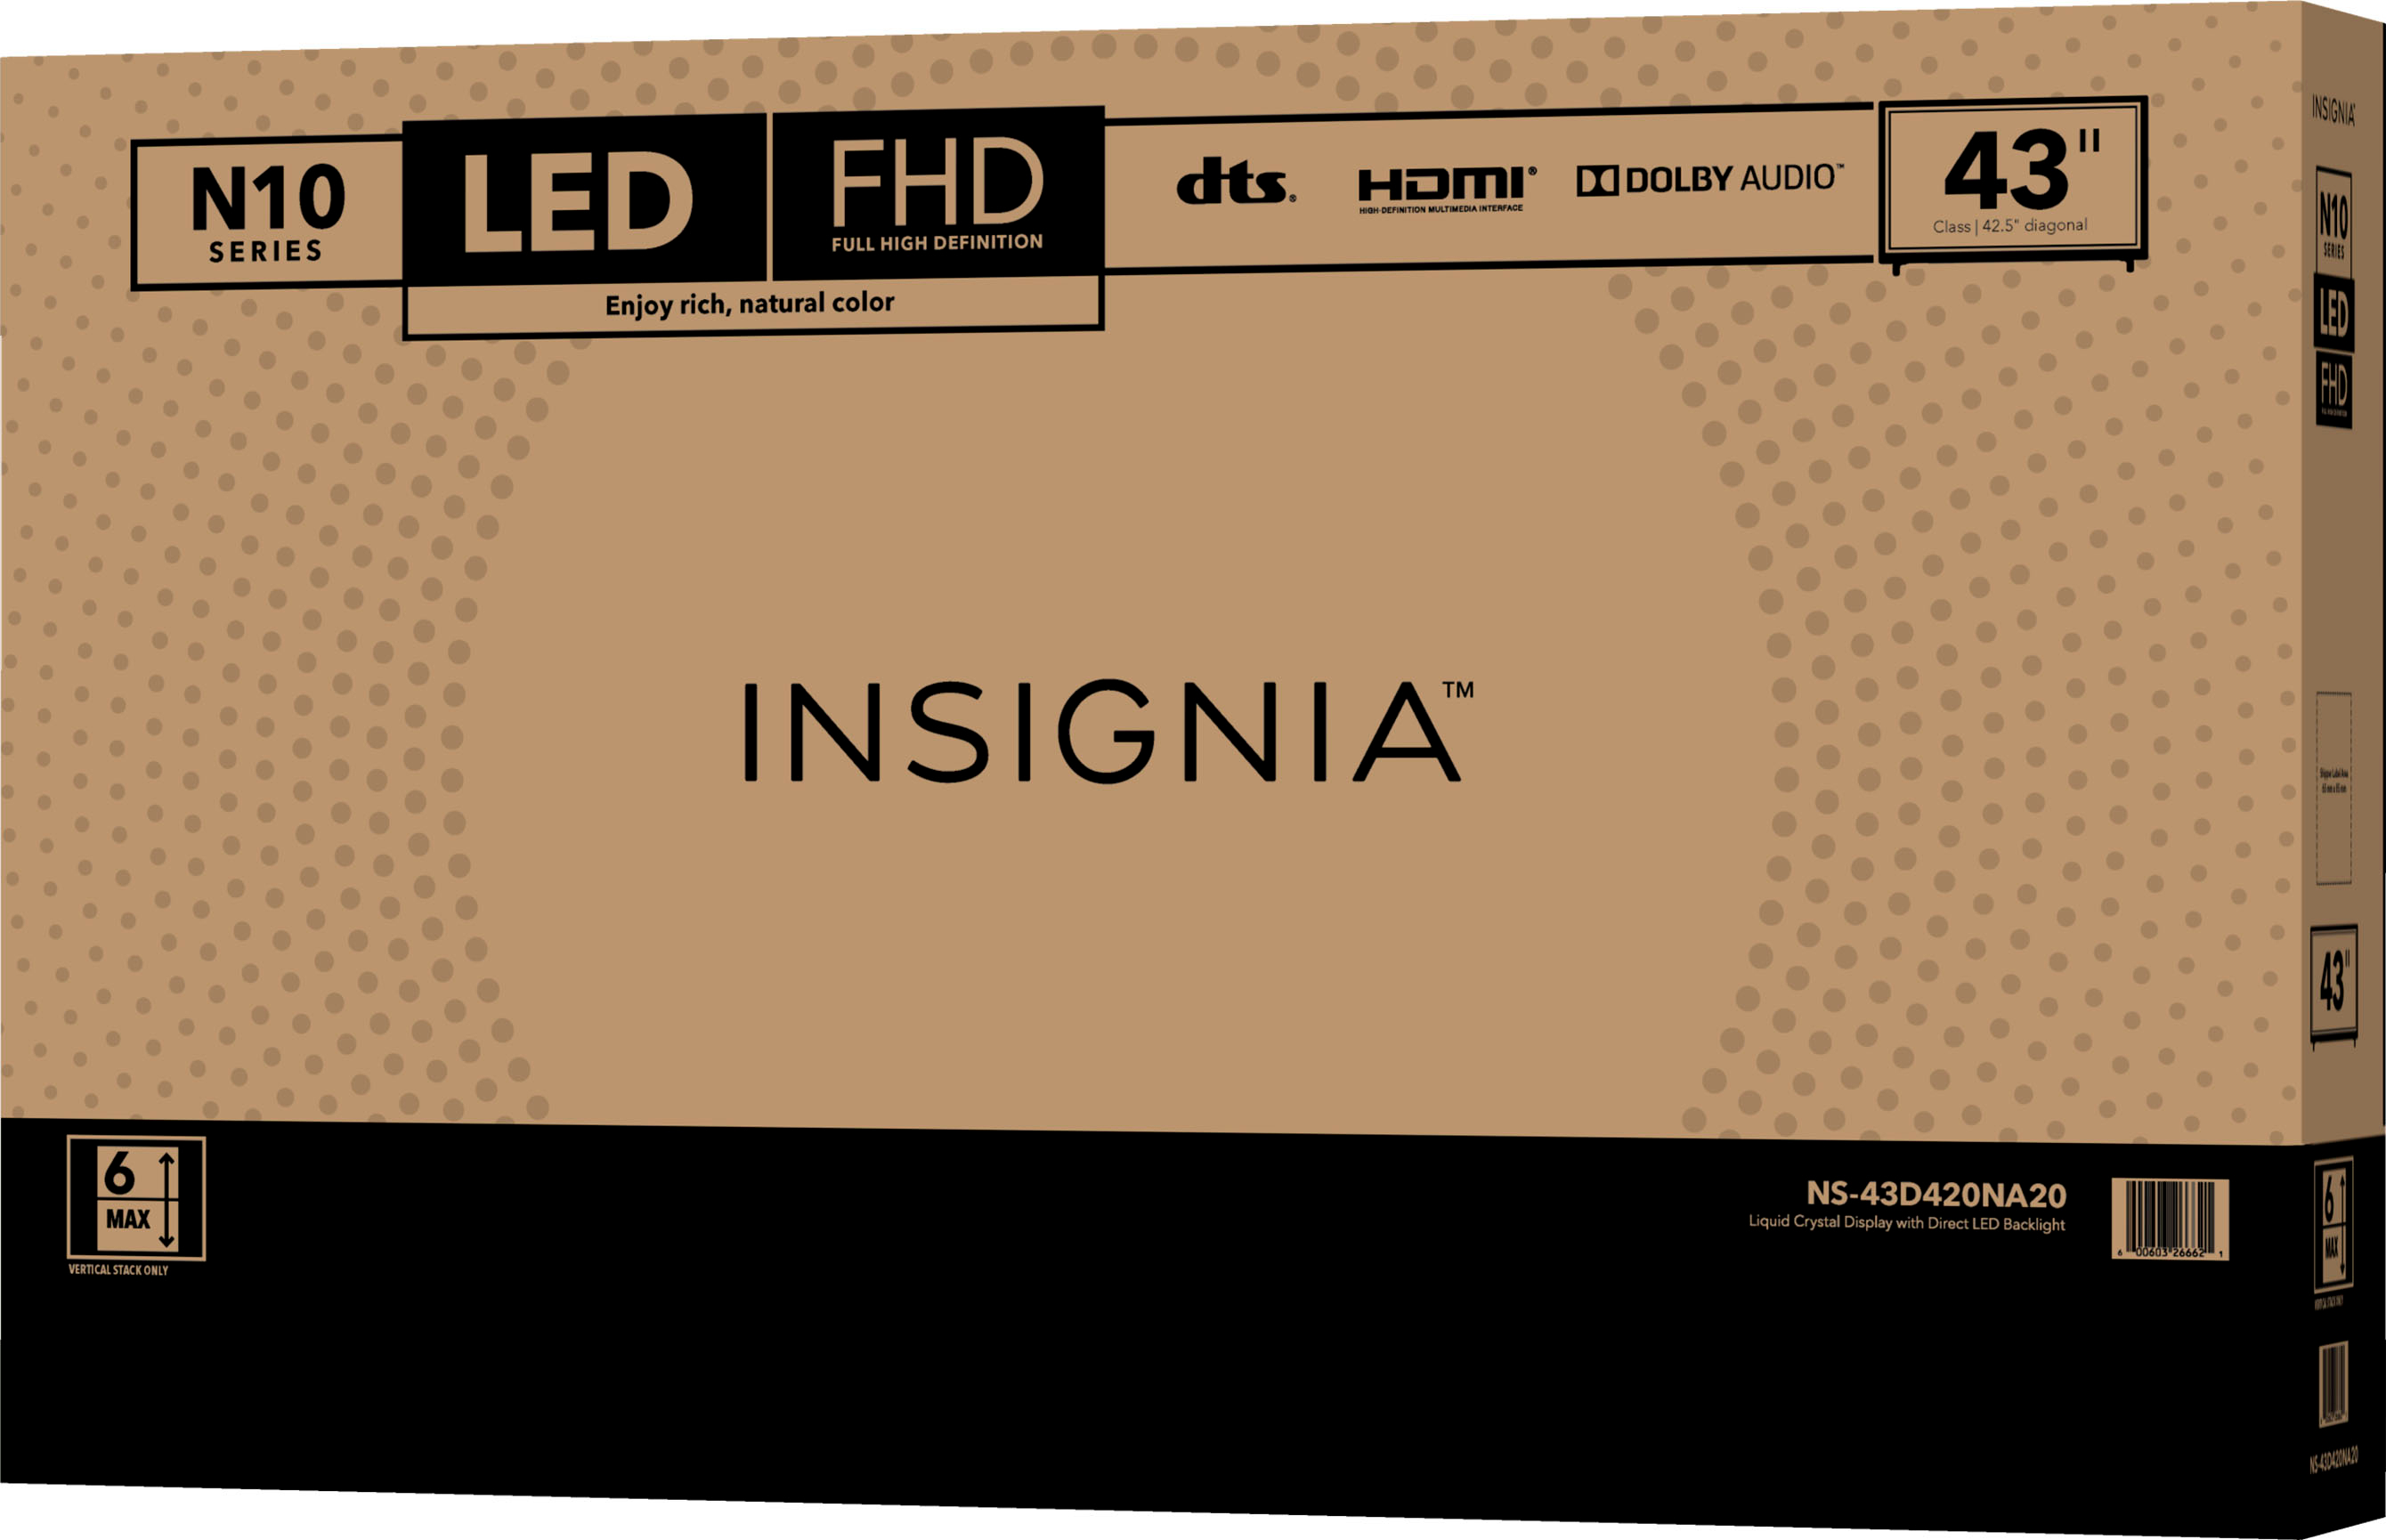 Best Buy: Insignia™ Connected TV 42 Class LED 1080p 120Hz Smart